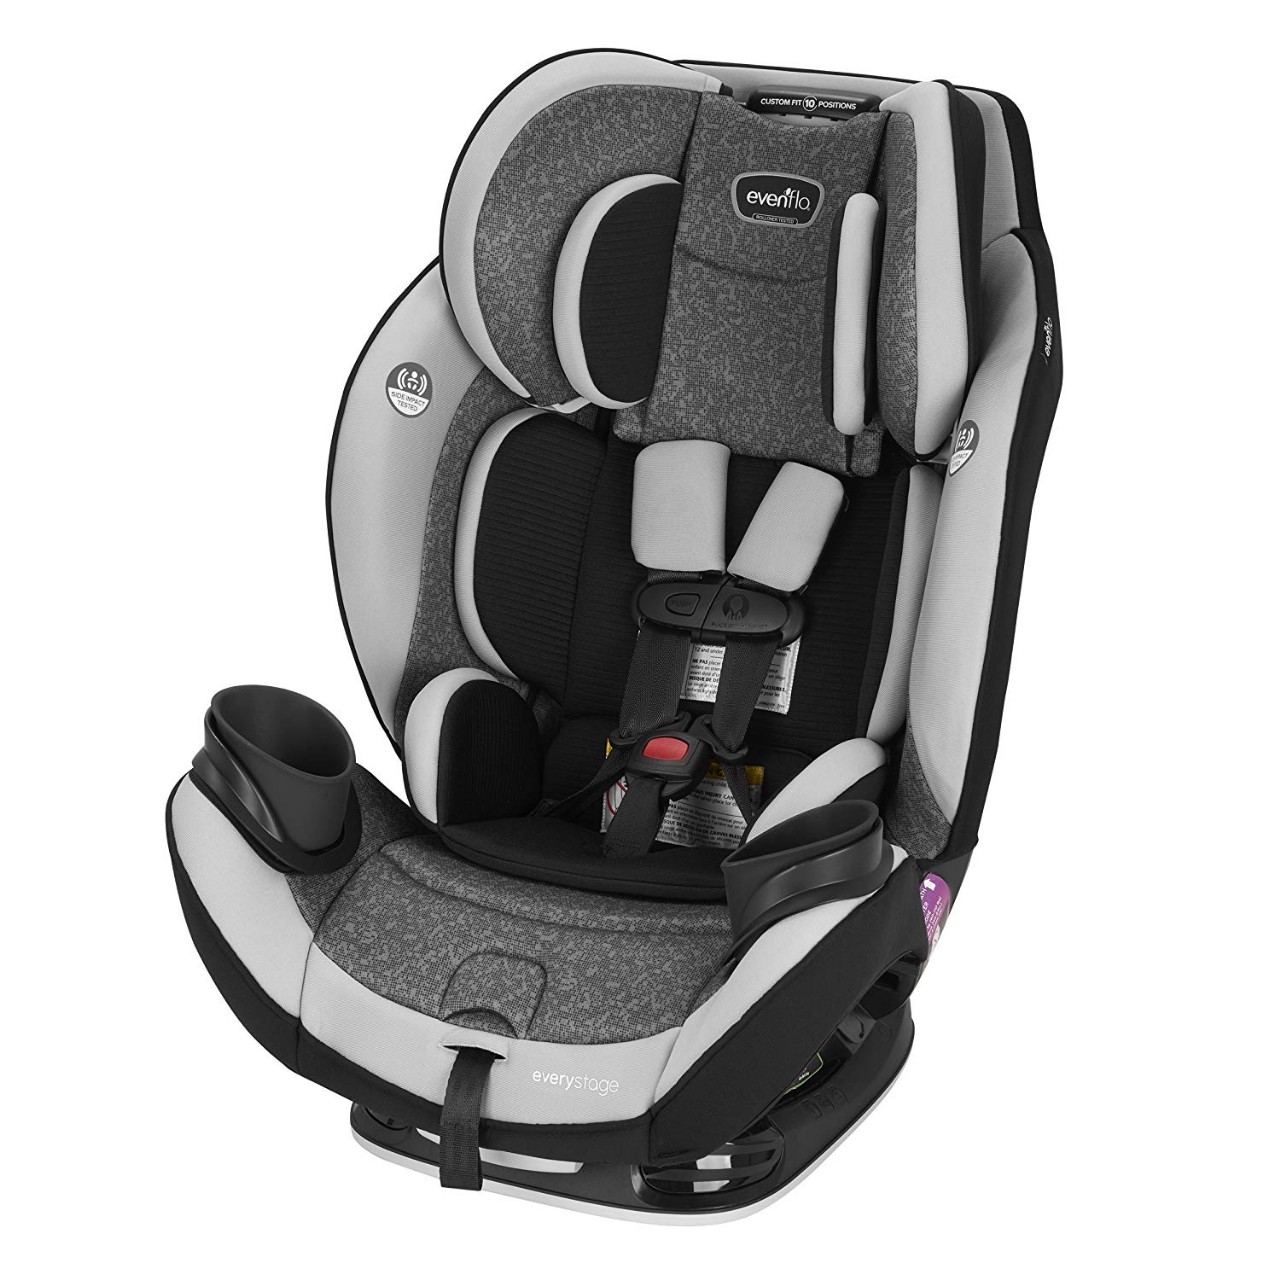 Evenflo EveryStage DLX All-in-One Car Seat, Infant Convertible & Booster Seat, Grows with Child Up t